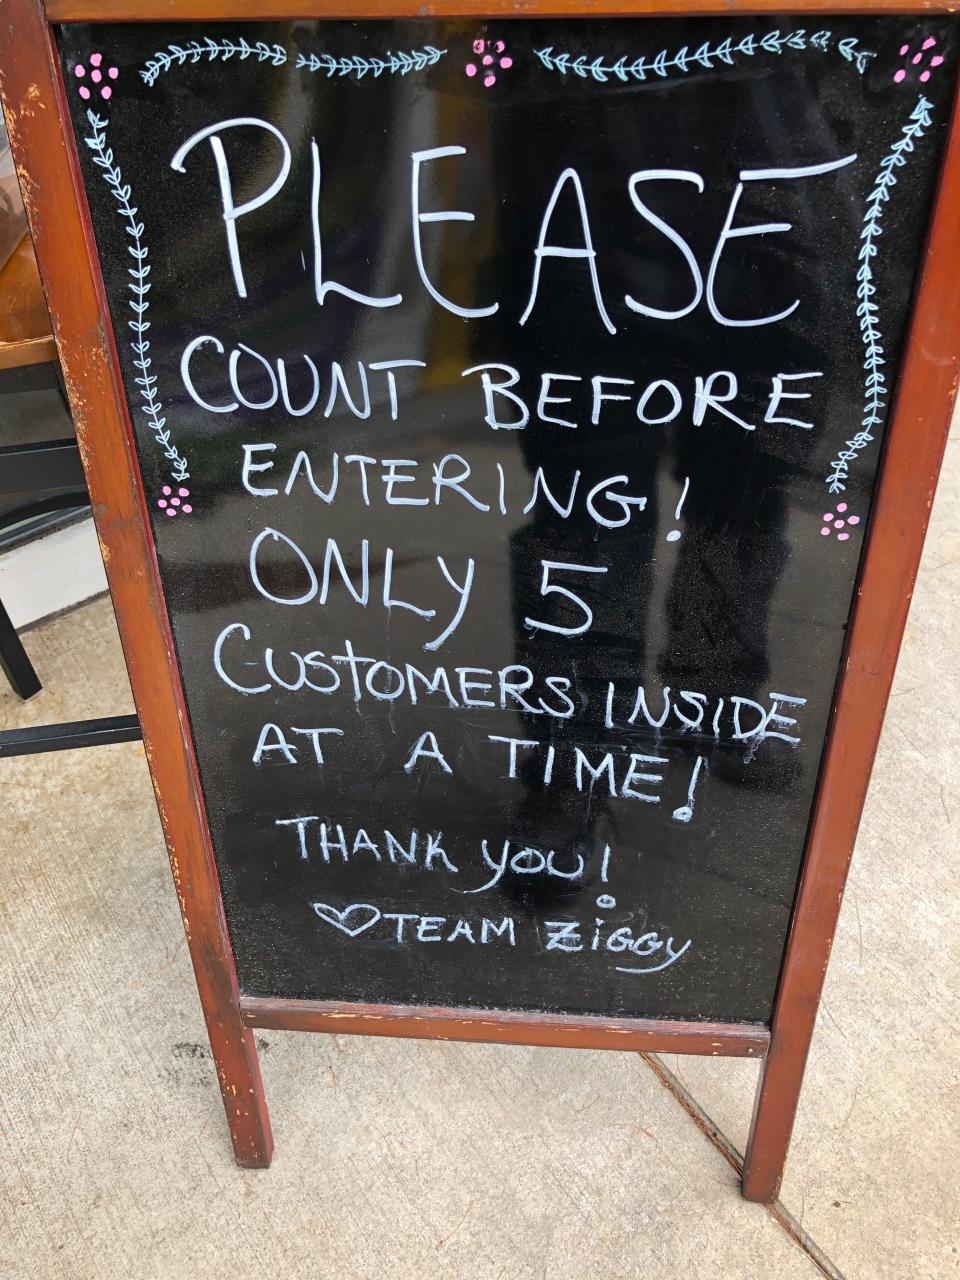 The COVID-19 pandemic has caused restaurants and other businesses to limit the number of customers inside at one time. Ziggy's Bakery & Deli had this sign out front on July 22.